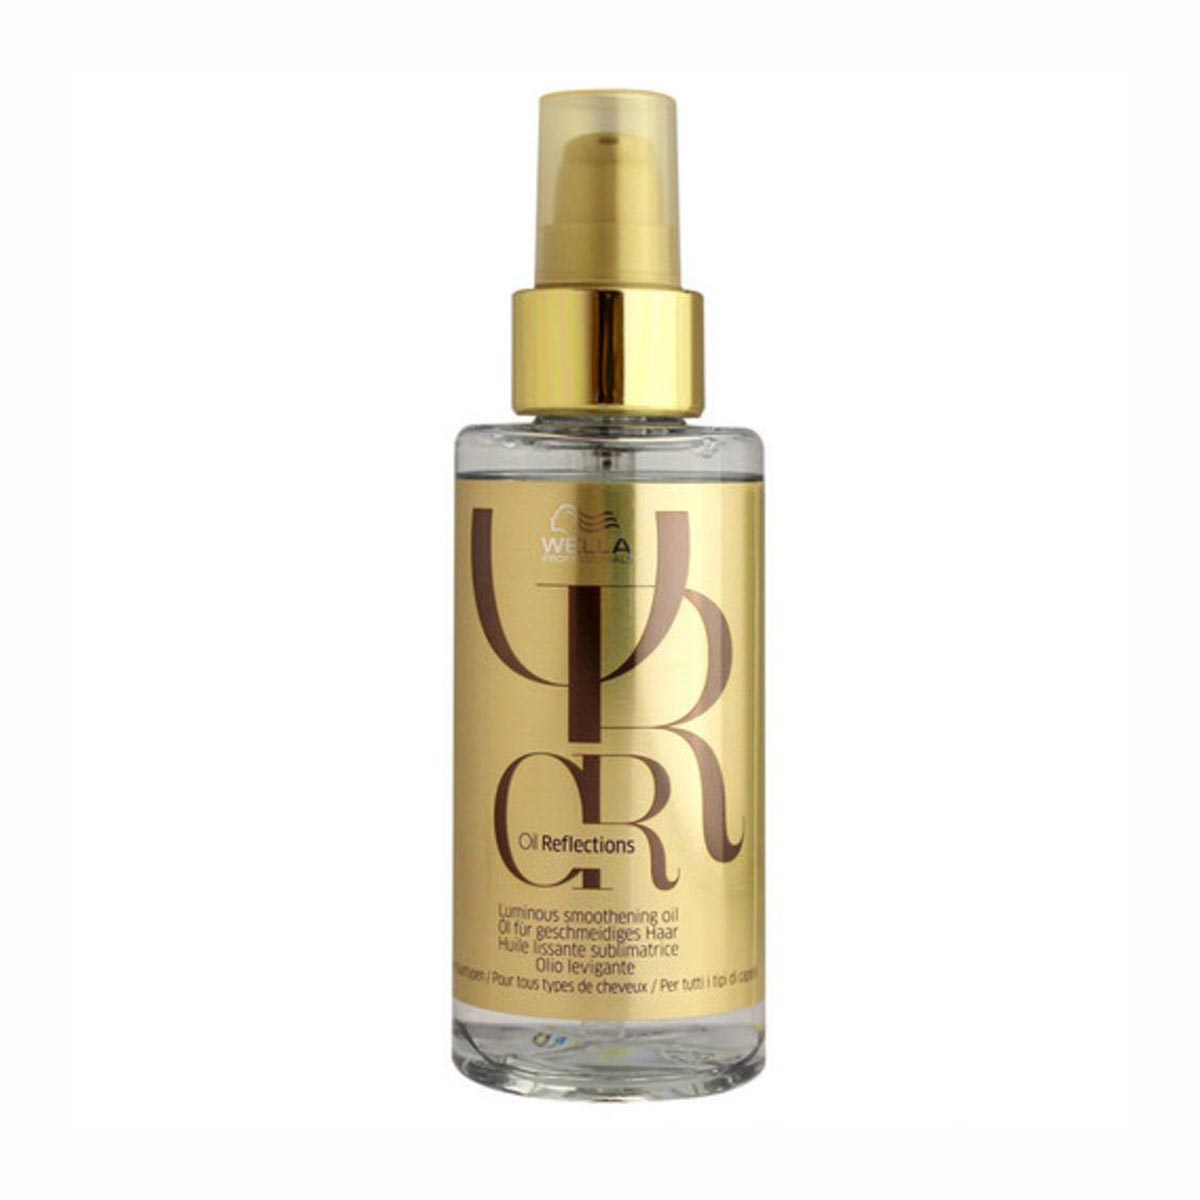 Image of Wella Oil Reflections Luminous Smoothing Oil 100ml